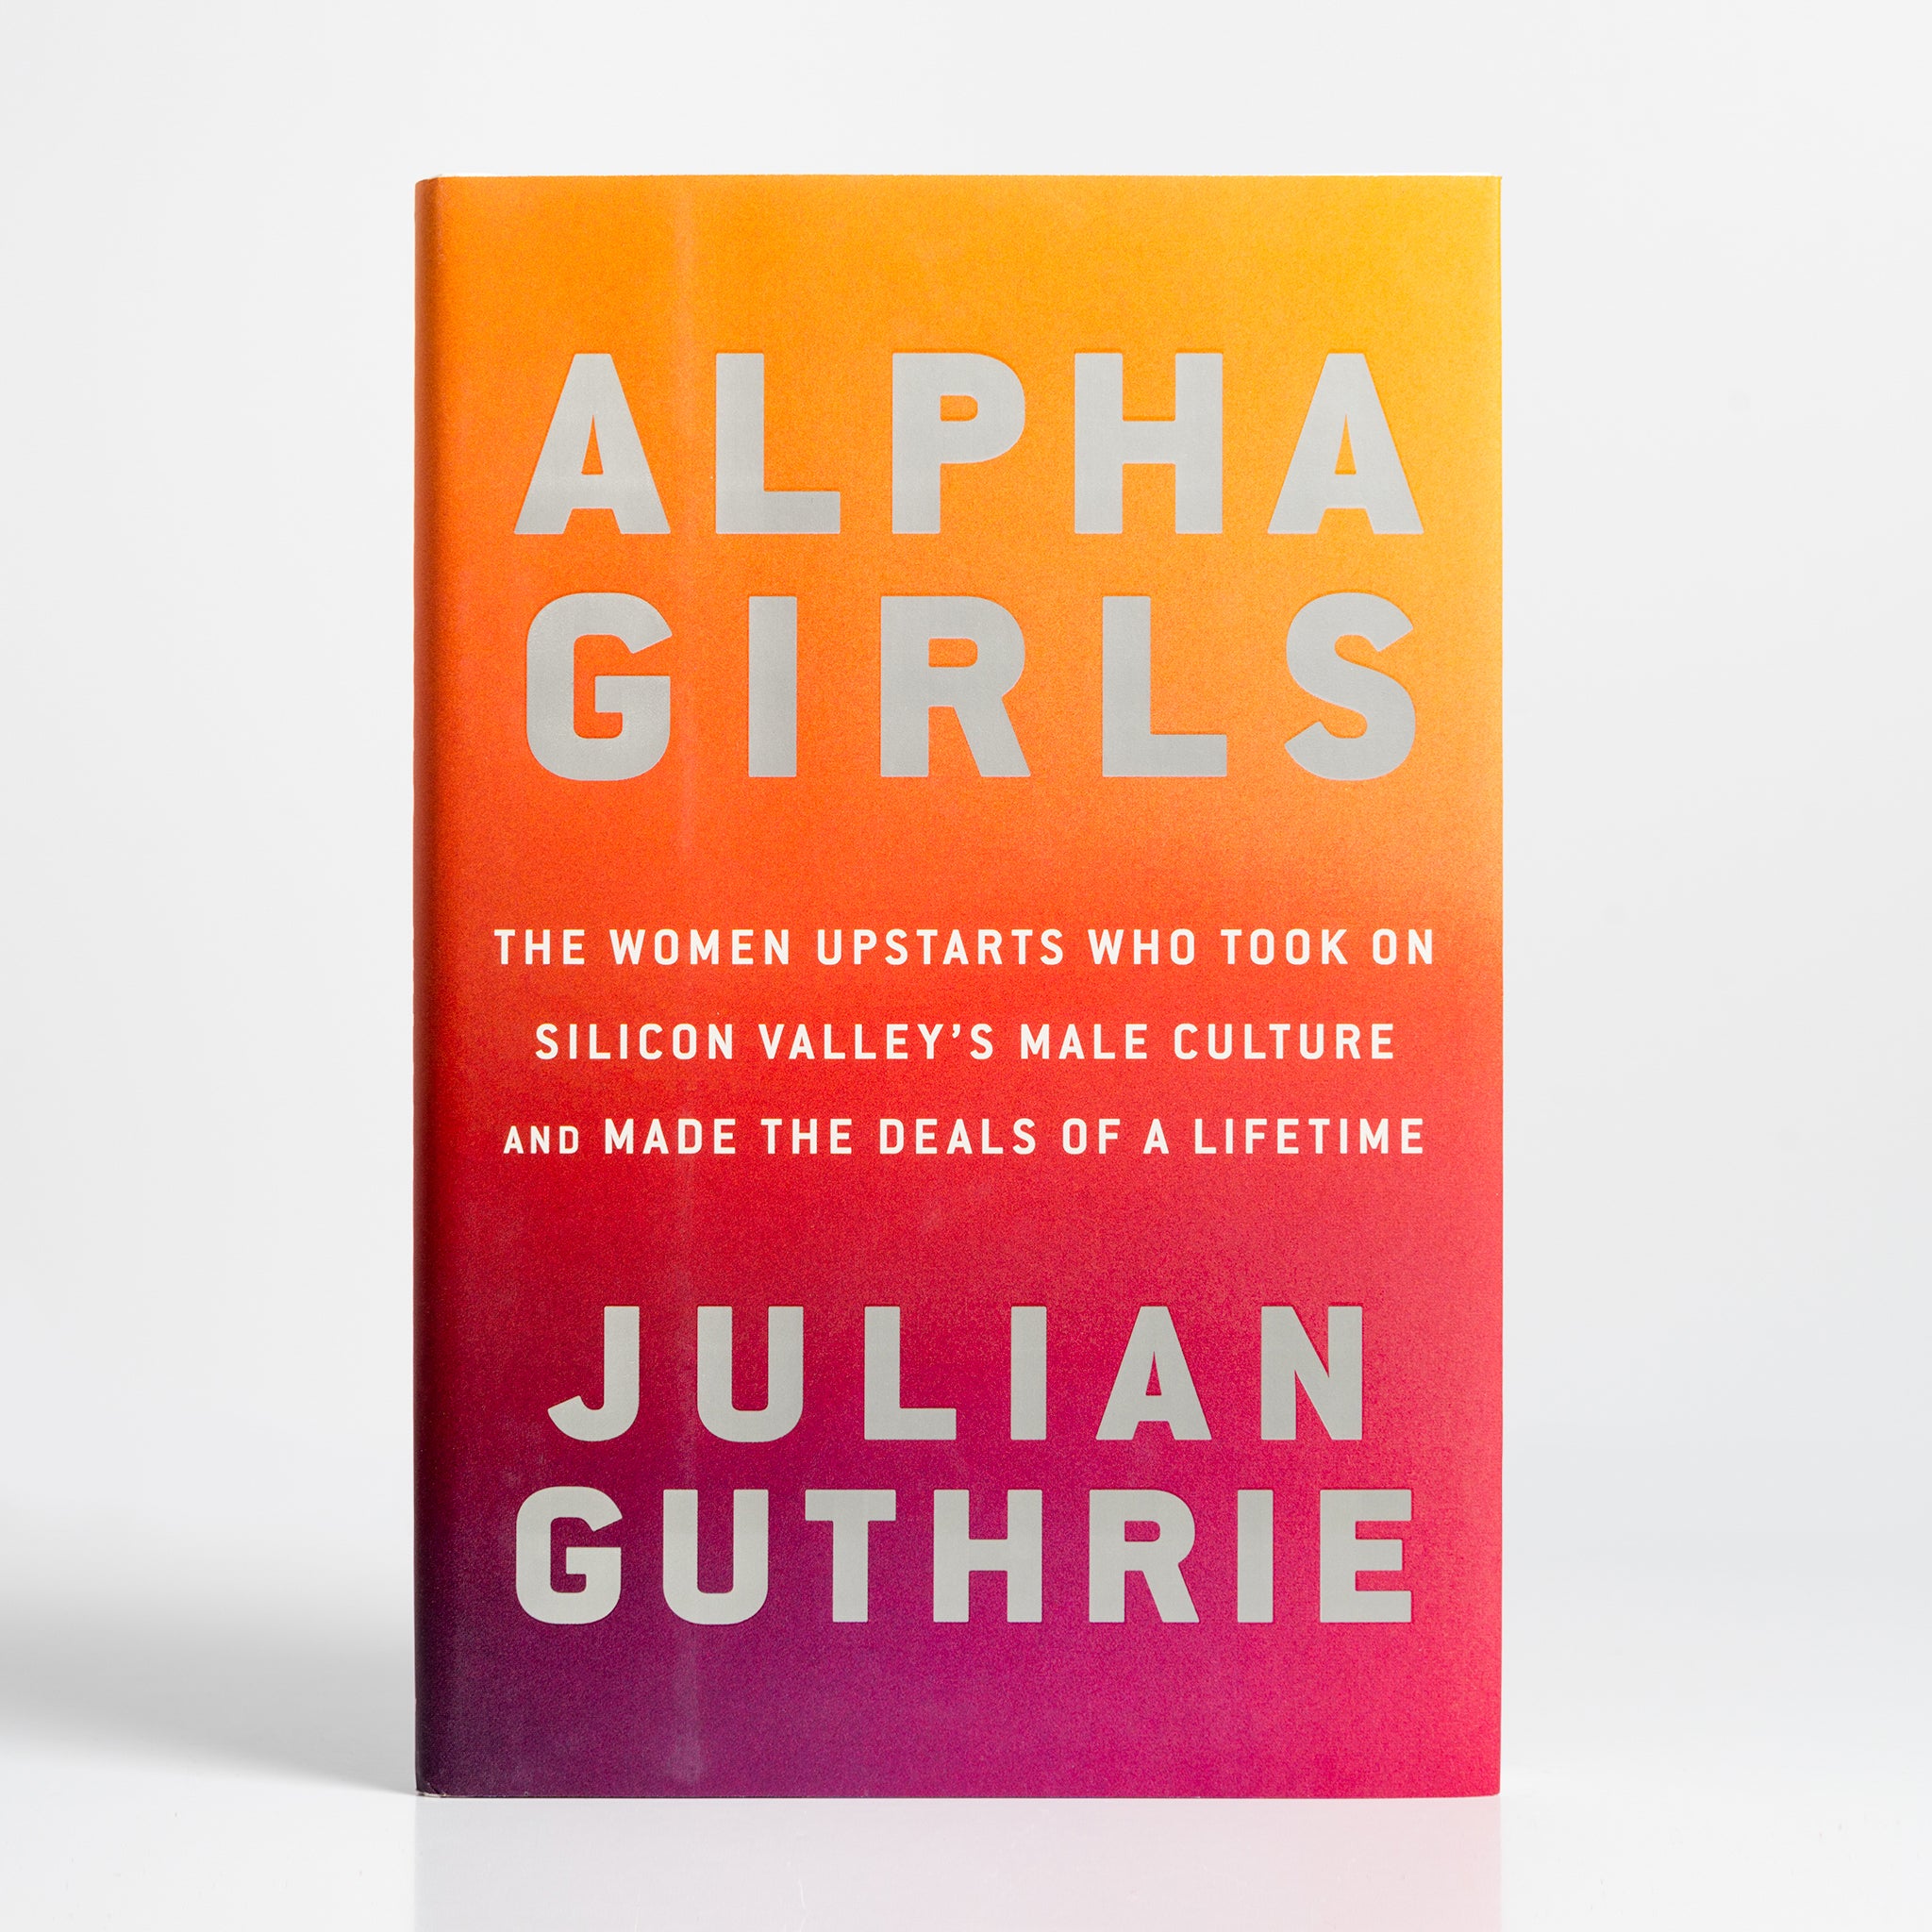 Alpha Girls: The Women Upstarts Who Took On Silicon Valley's Male Culture and Made the Deals of a Lifetime by Julian Guthrie